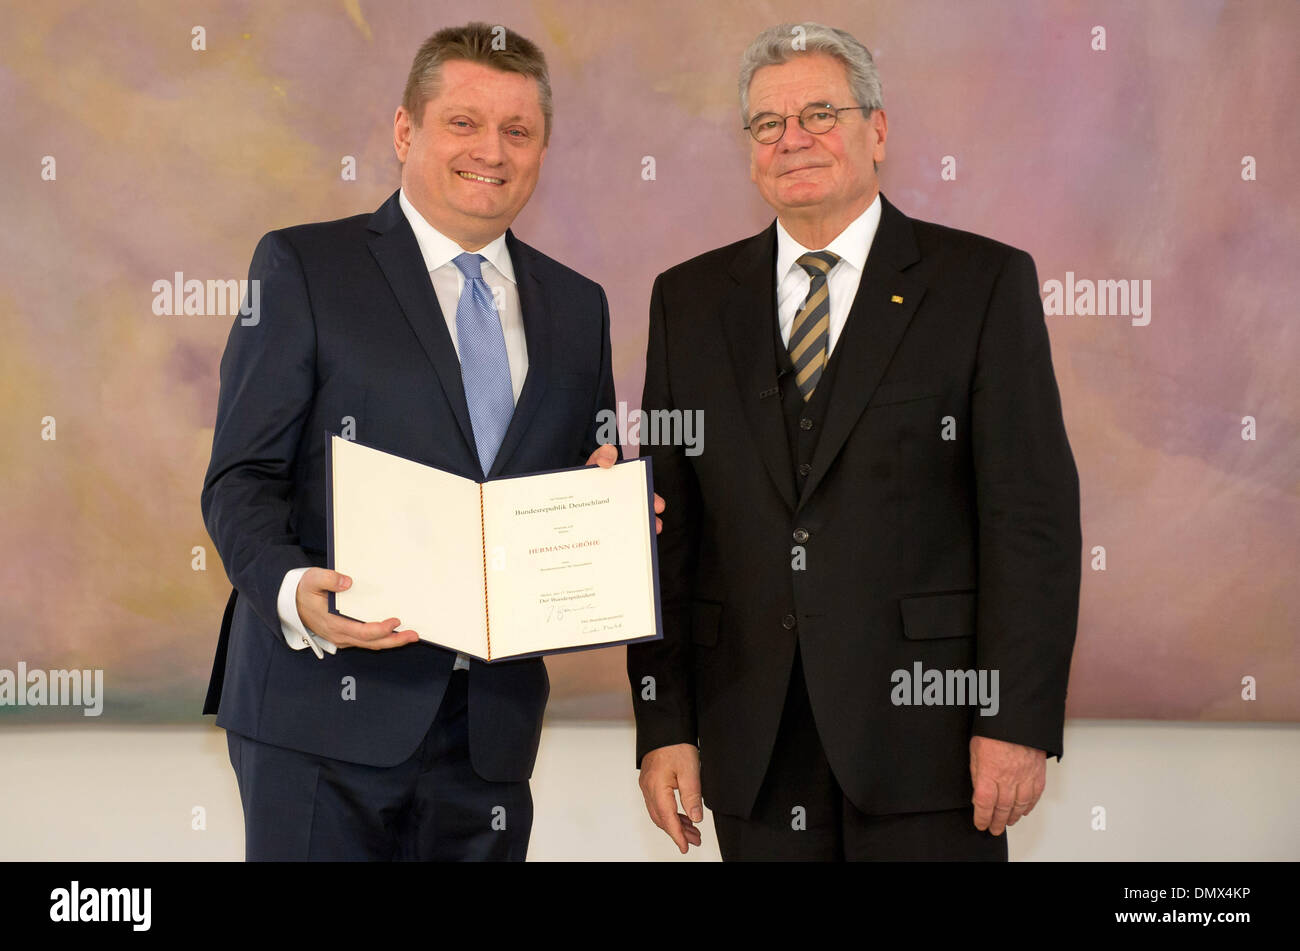 Berlin, Germany. 17th Dec, 2013. German President Joachim Gauck (R) gives the appointment document to the new German Health Minister Hermann Groehe (CDU) in Bellevue Palace in Berlin, Germany, 17 December 2013. Photo: Tim Brakemeier/dpa/Alamy Live News Stock Photo